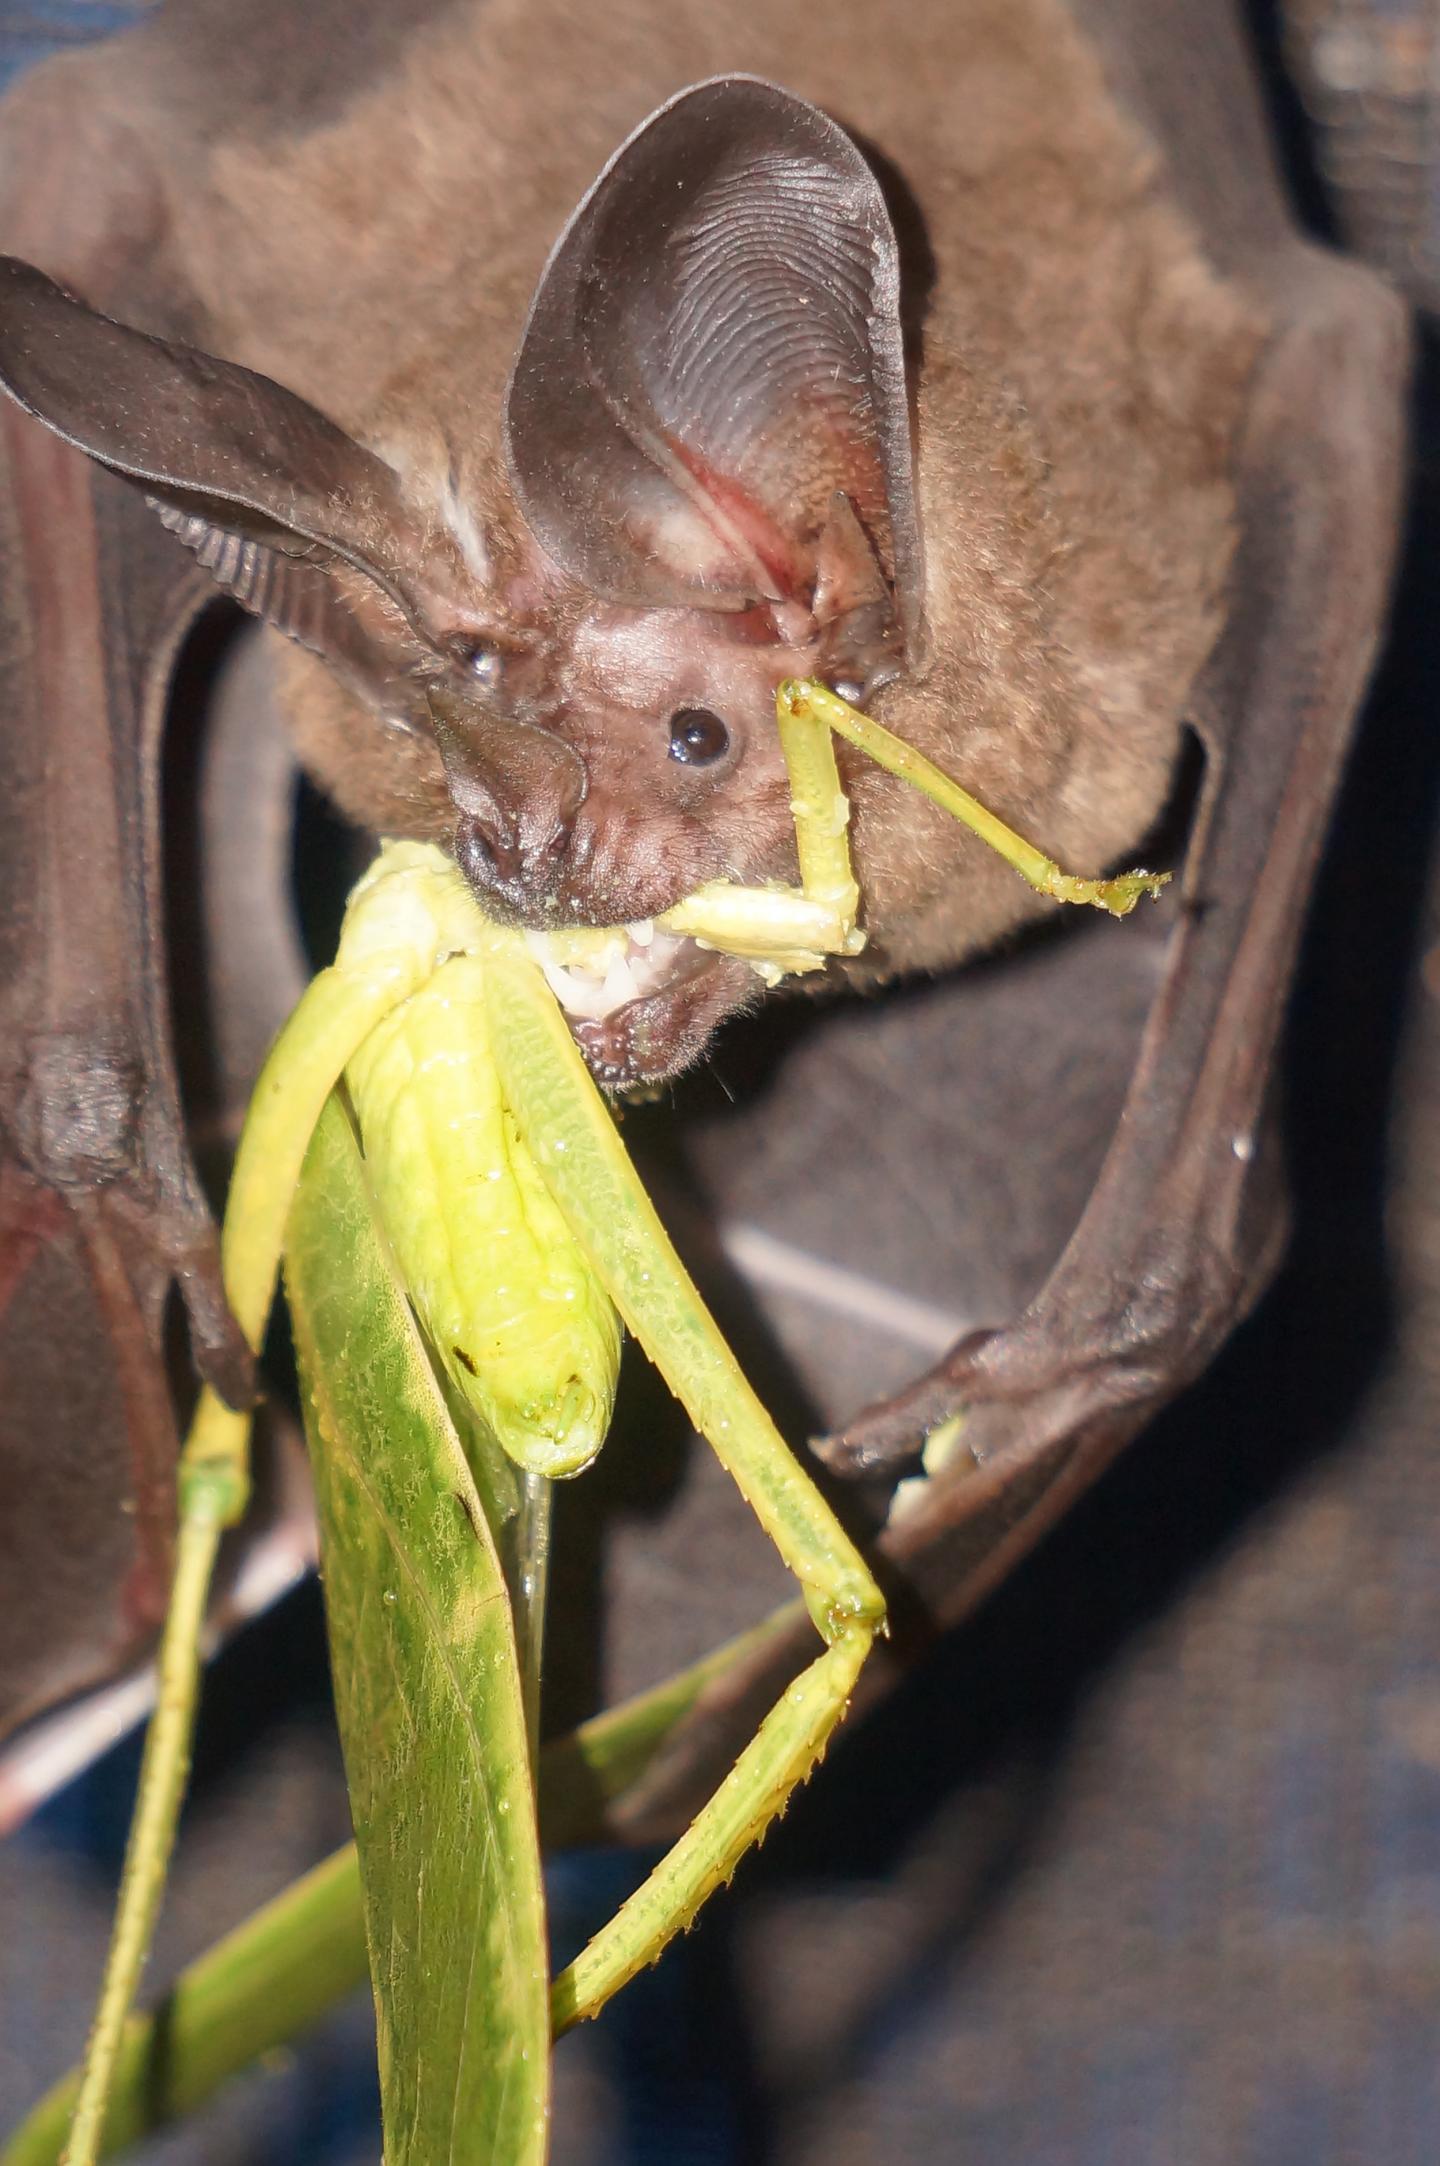 Bats Can Learn from Other Species, in Addition to Their Own